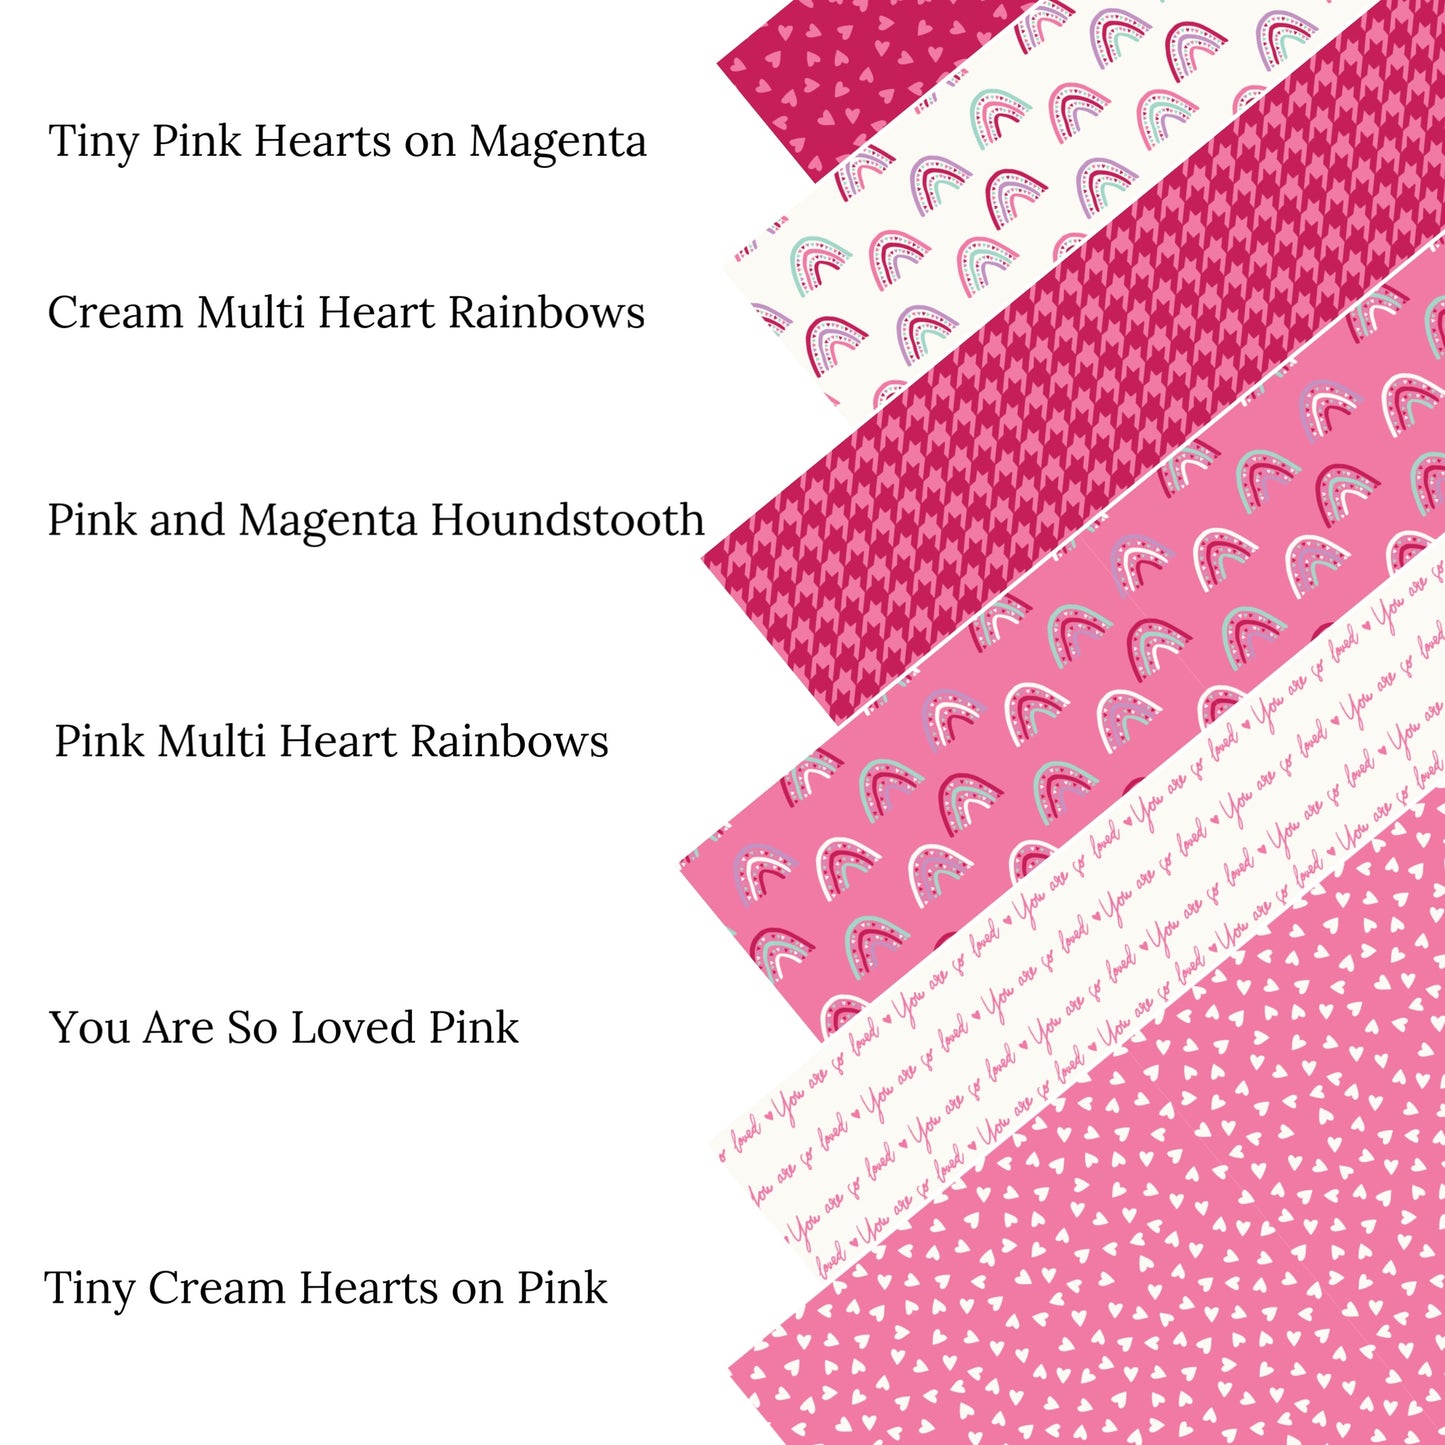 Tiny Cream Hearts on Pink Faux Leather Sheets